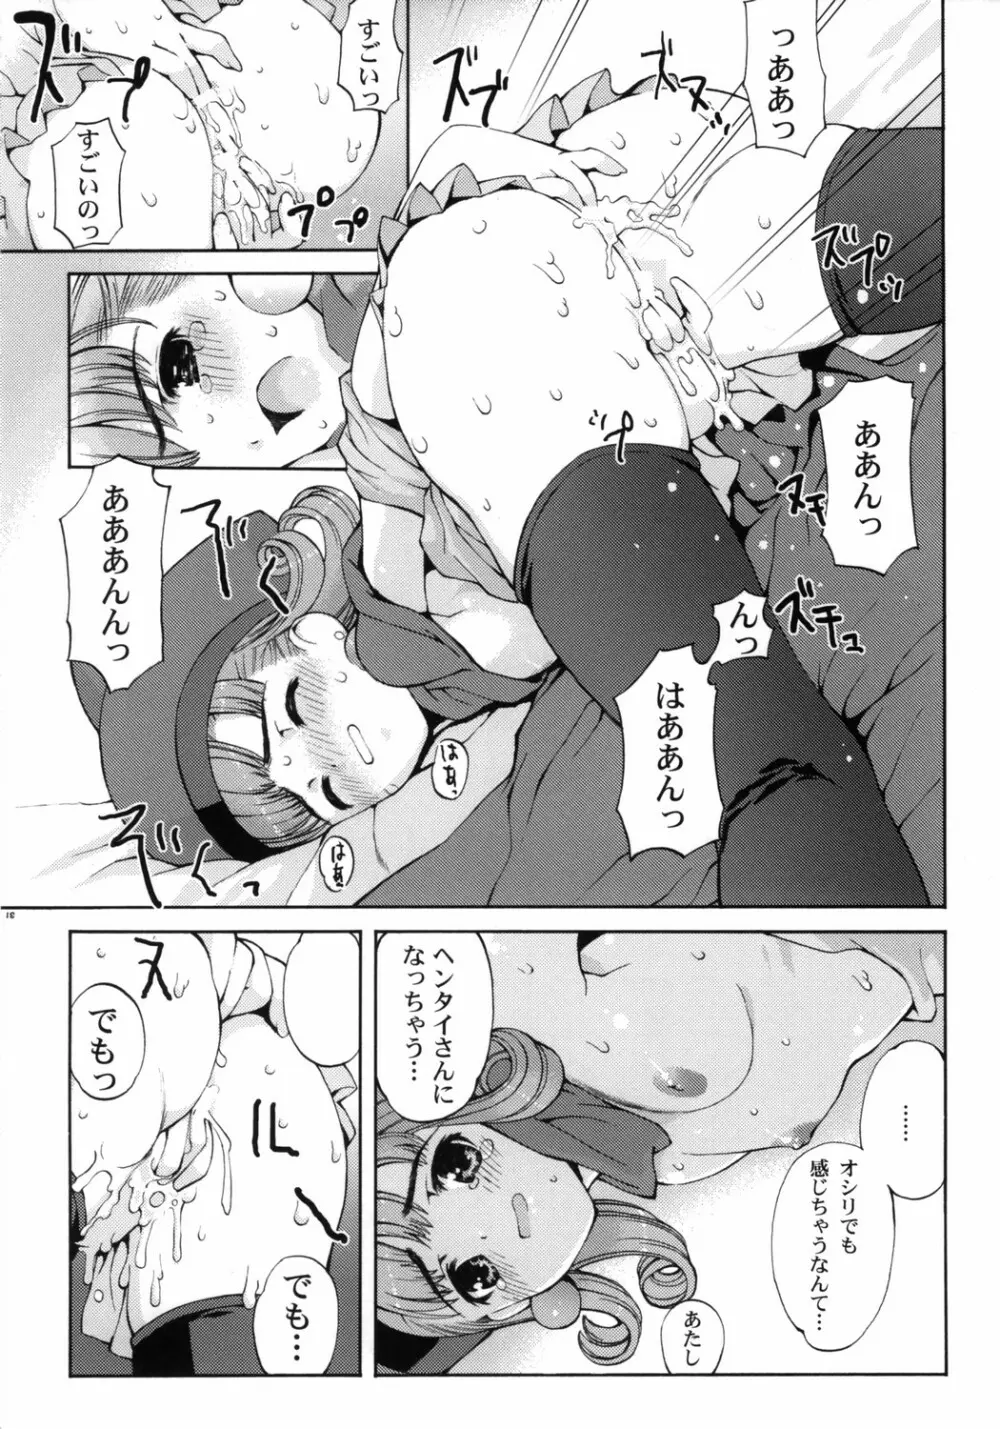 RE:set One Page.34